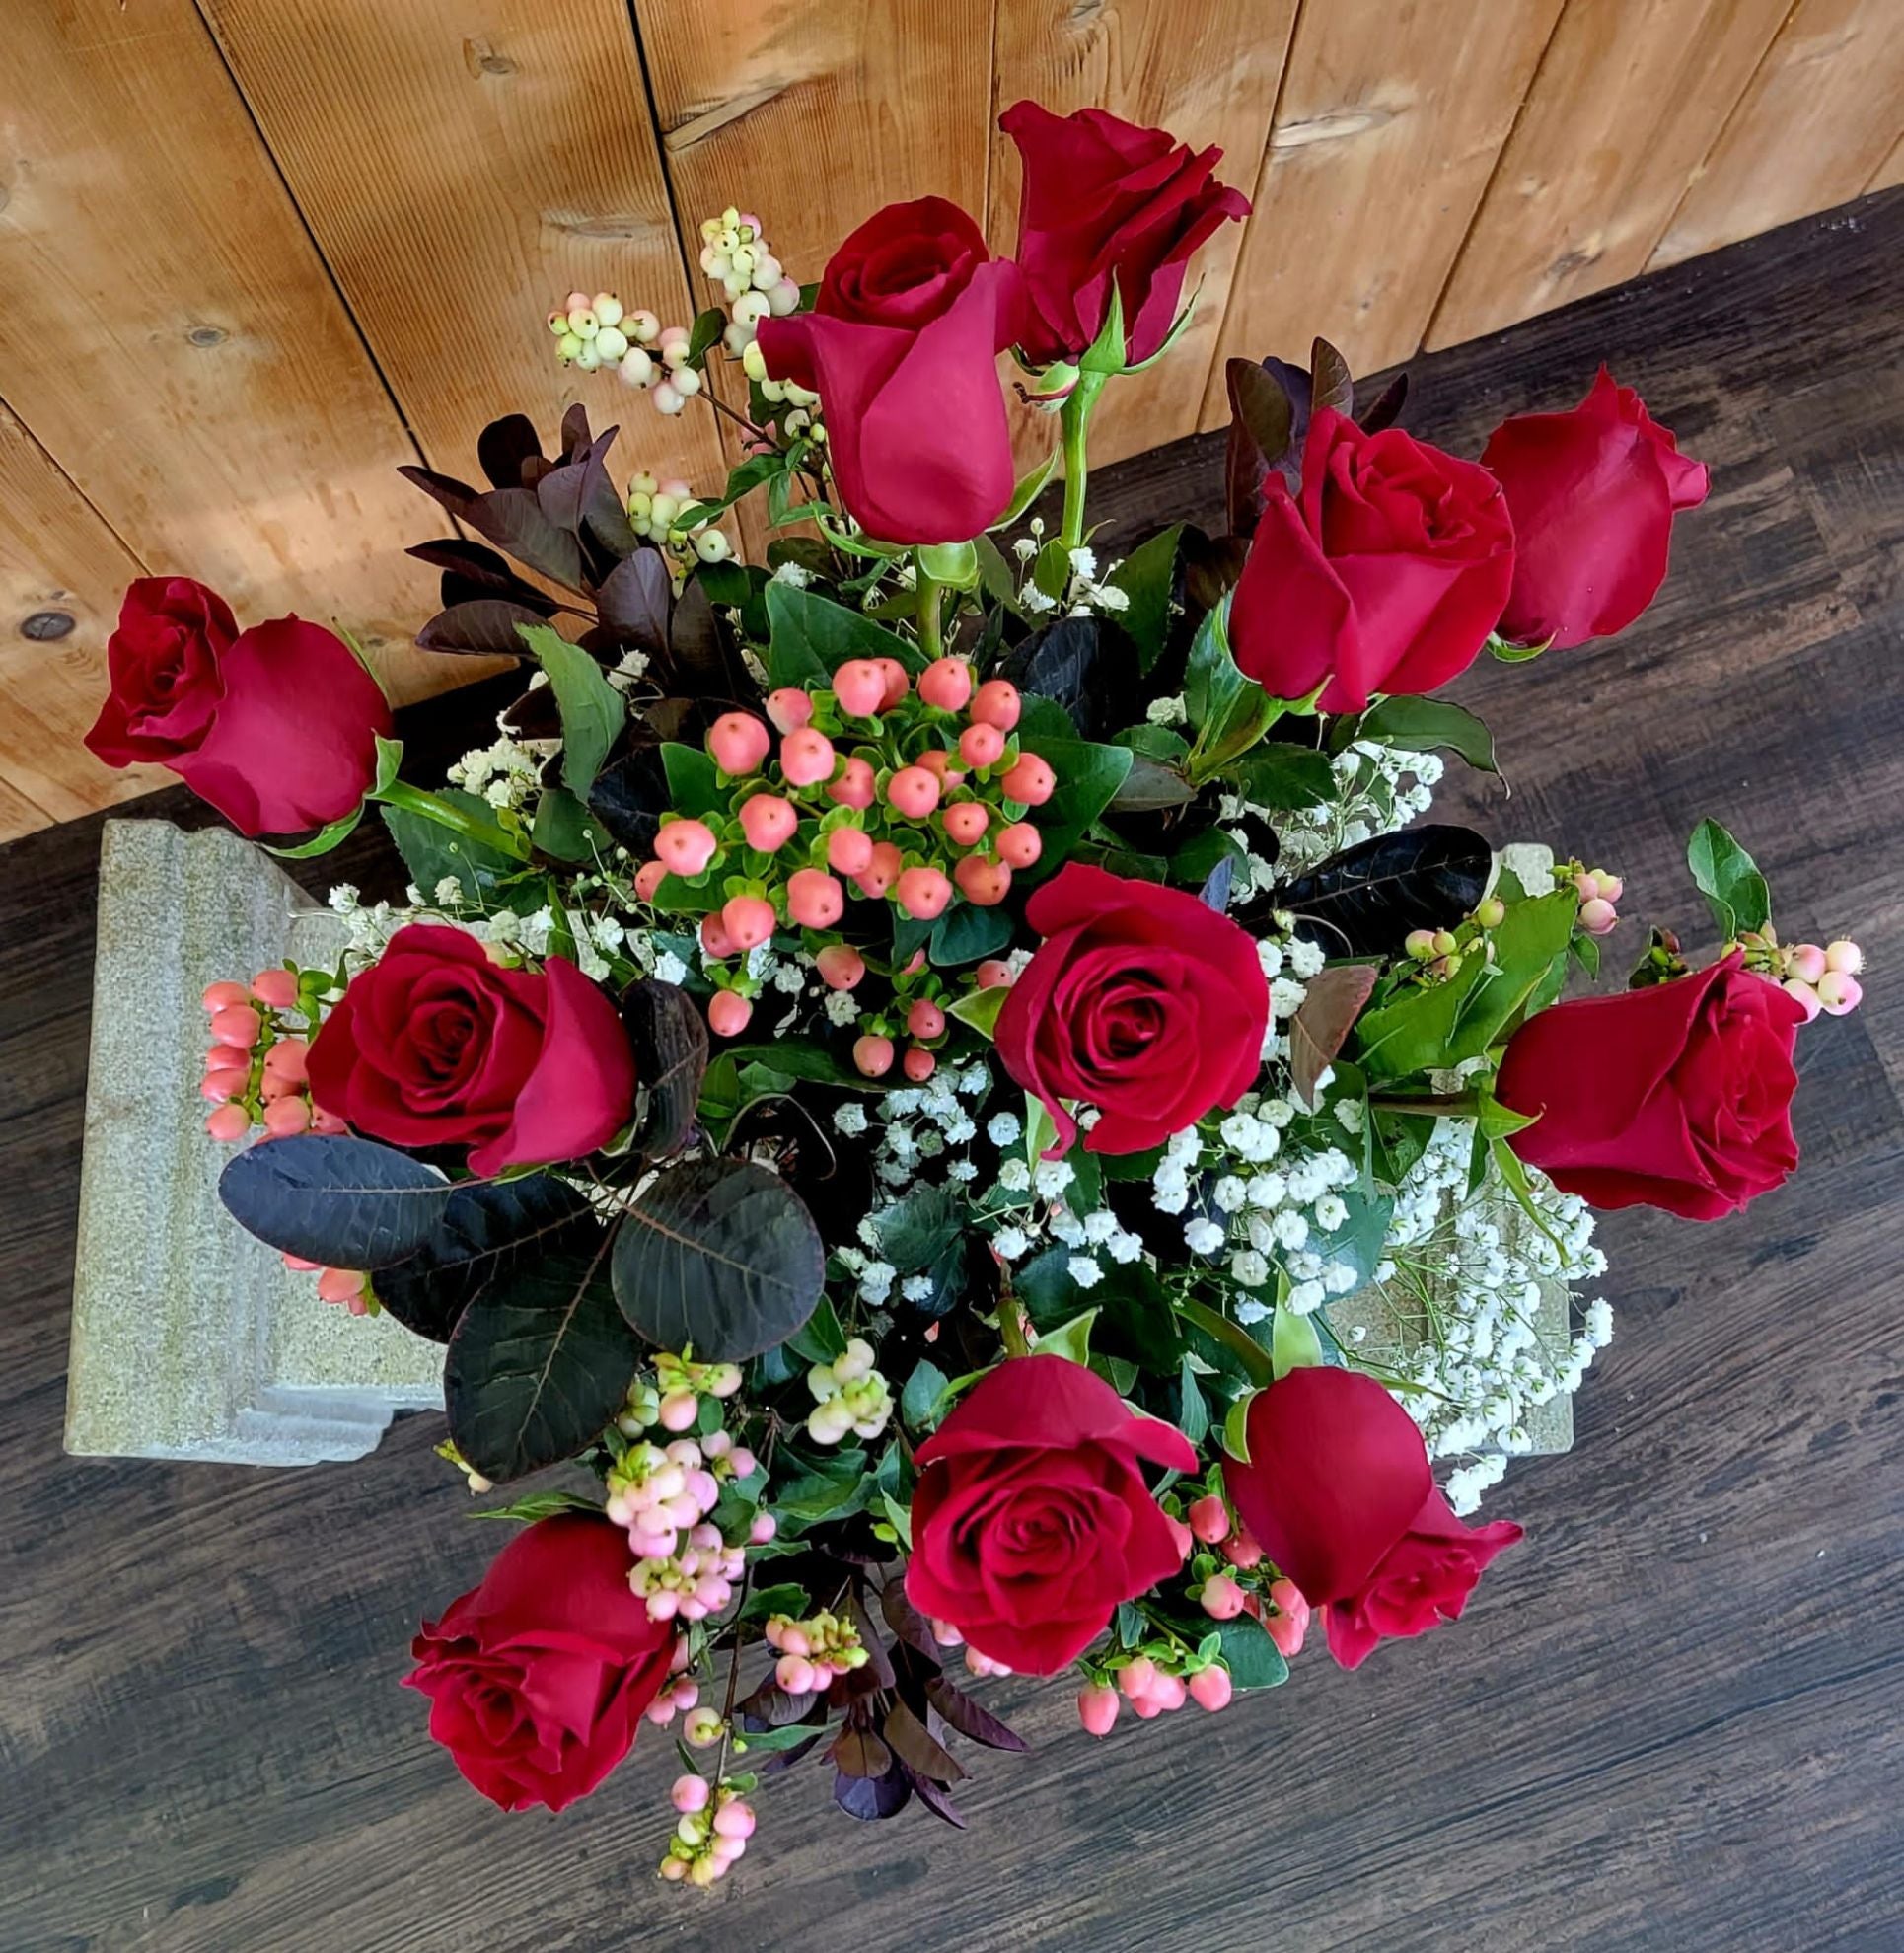 Dozen of Red Roses with Fillers